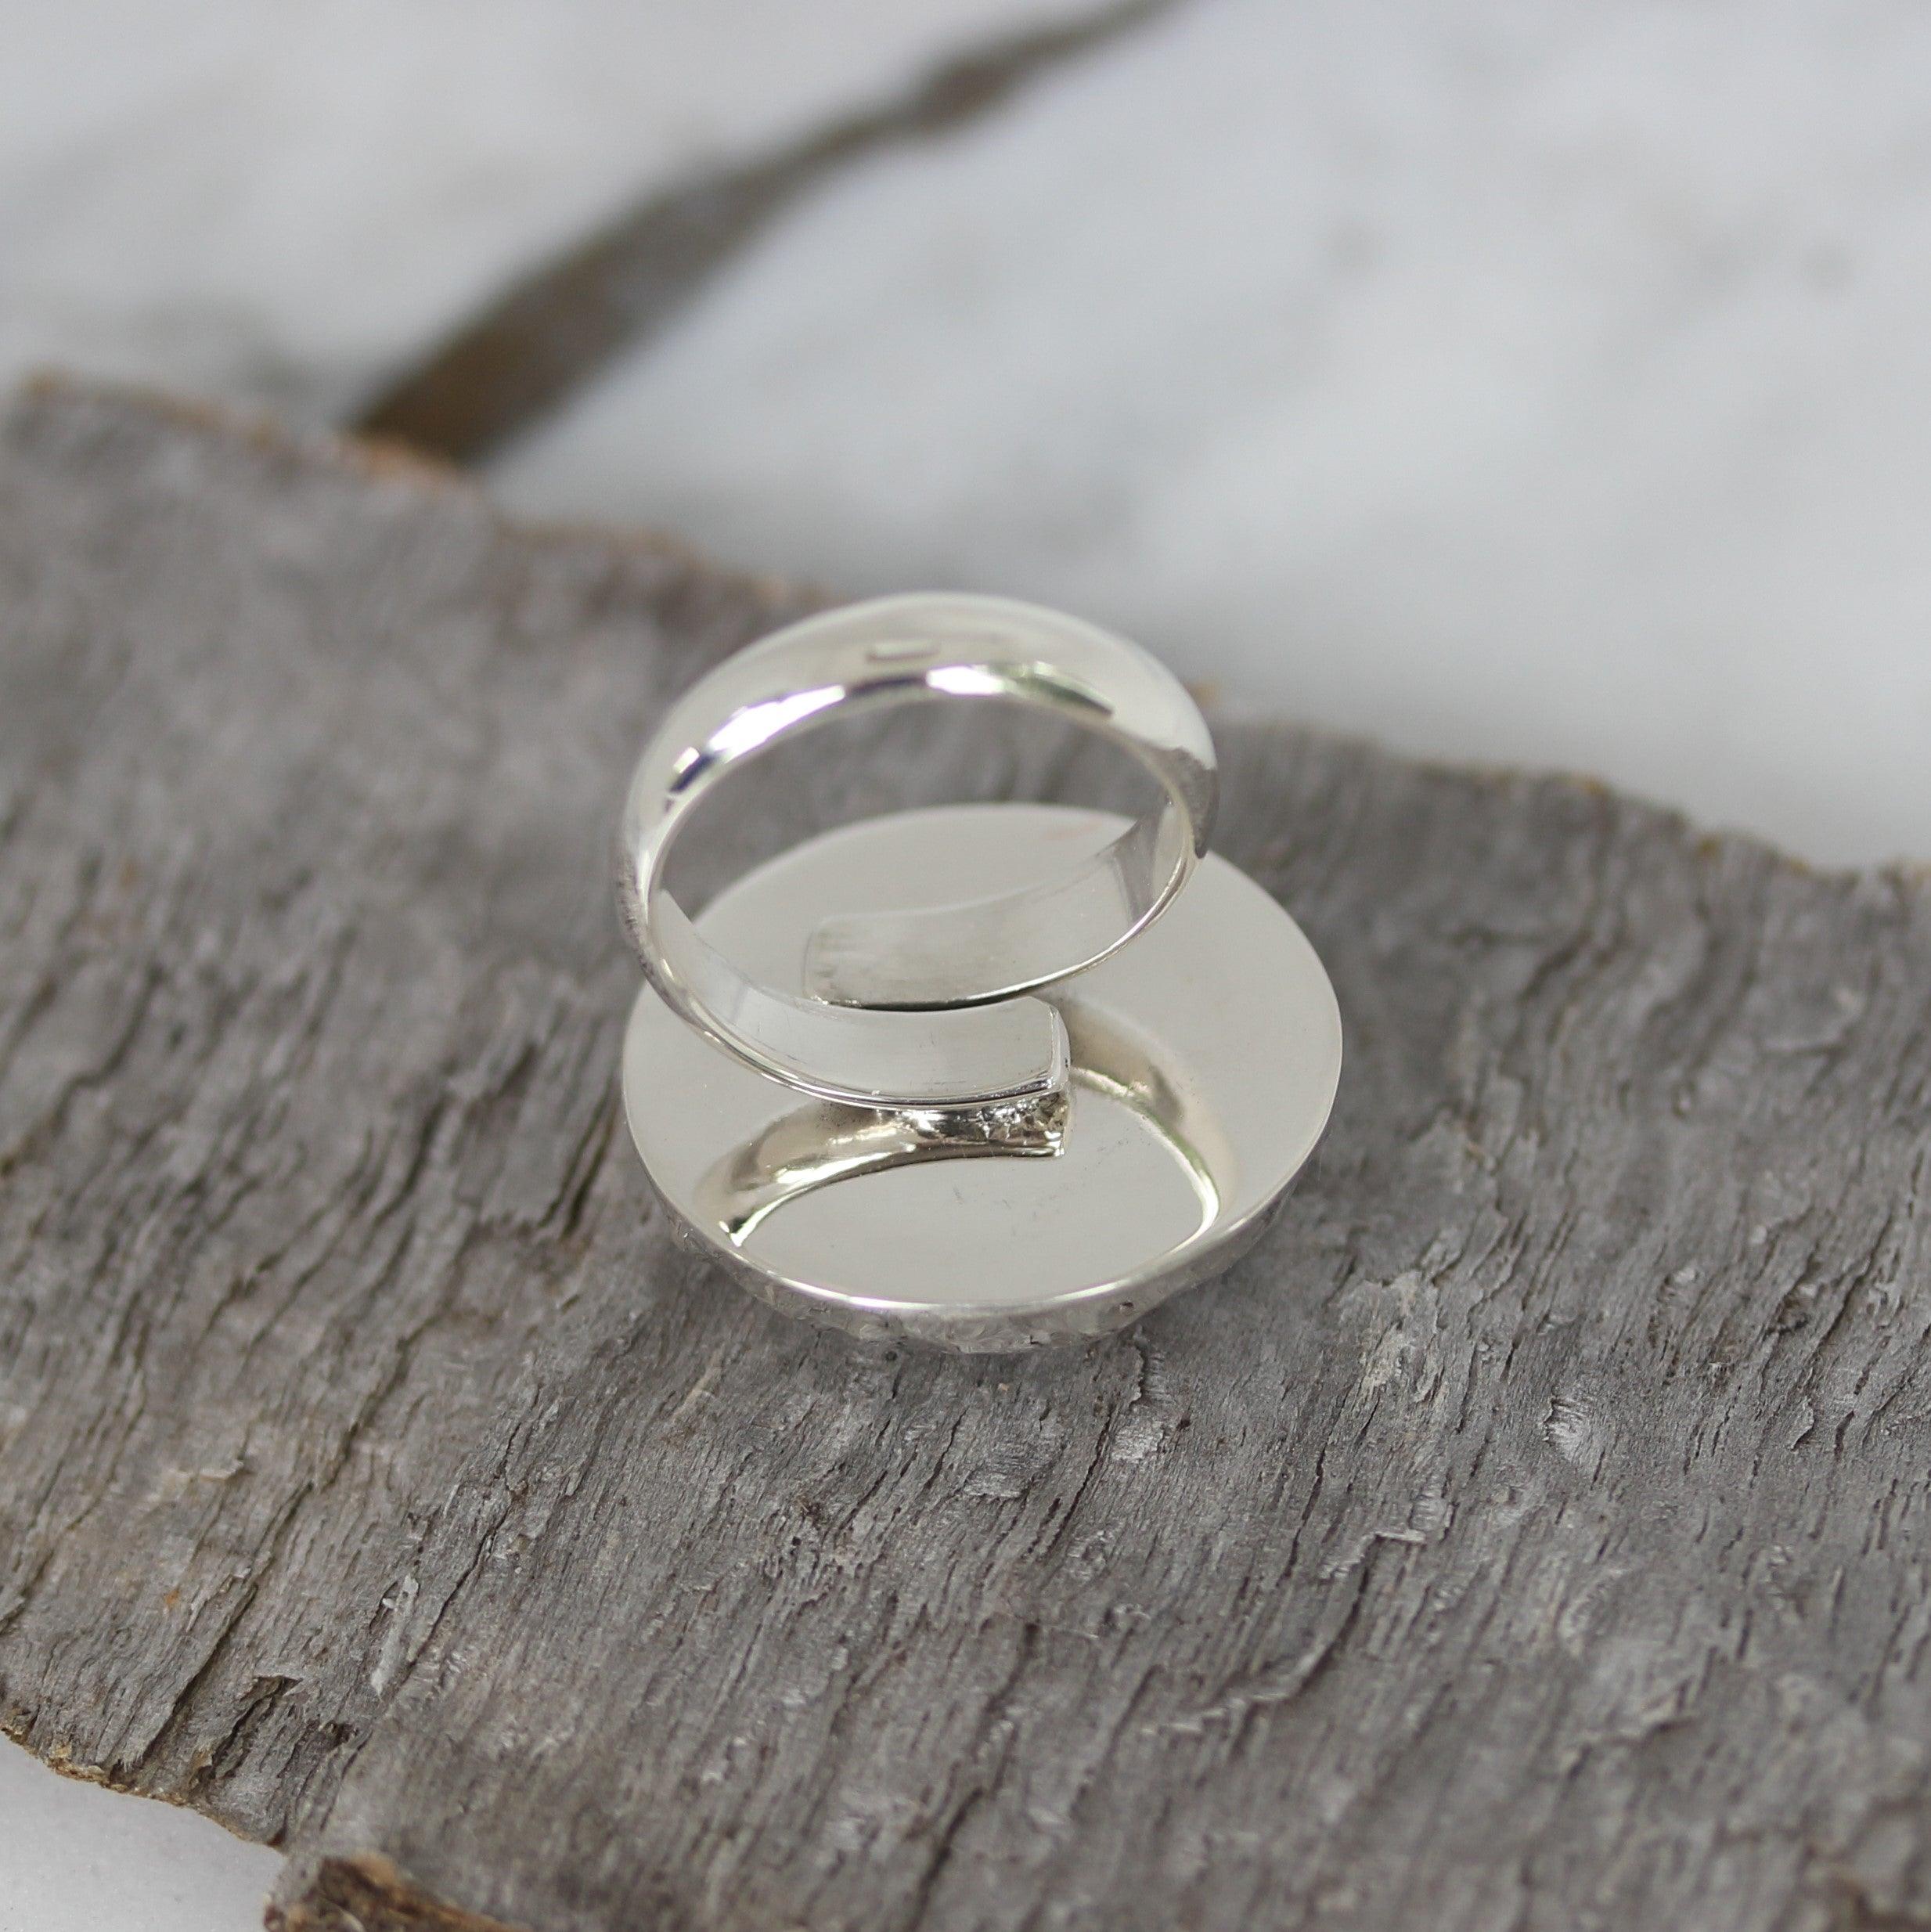 Sterling Silver Hammered Beaten 25mm Round Dome Adjustable Ring - STERLING SILVER DESIGNS